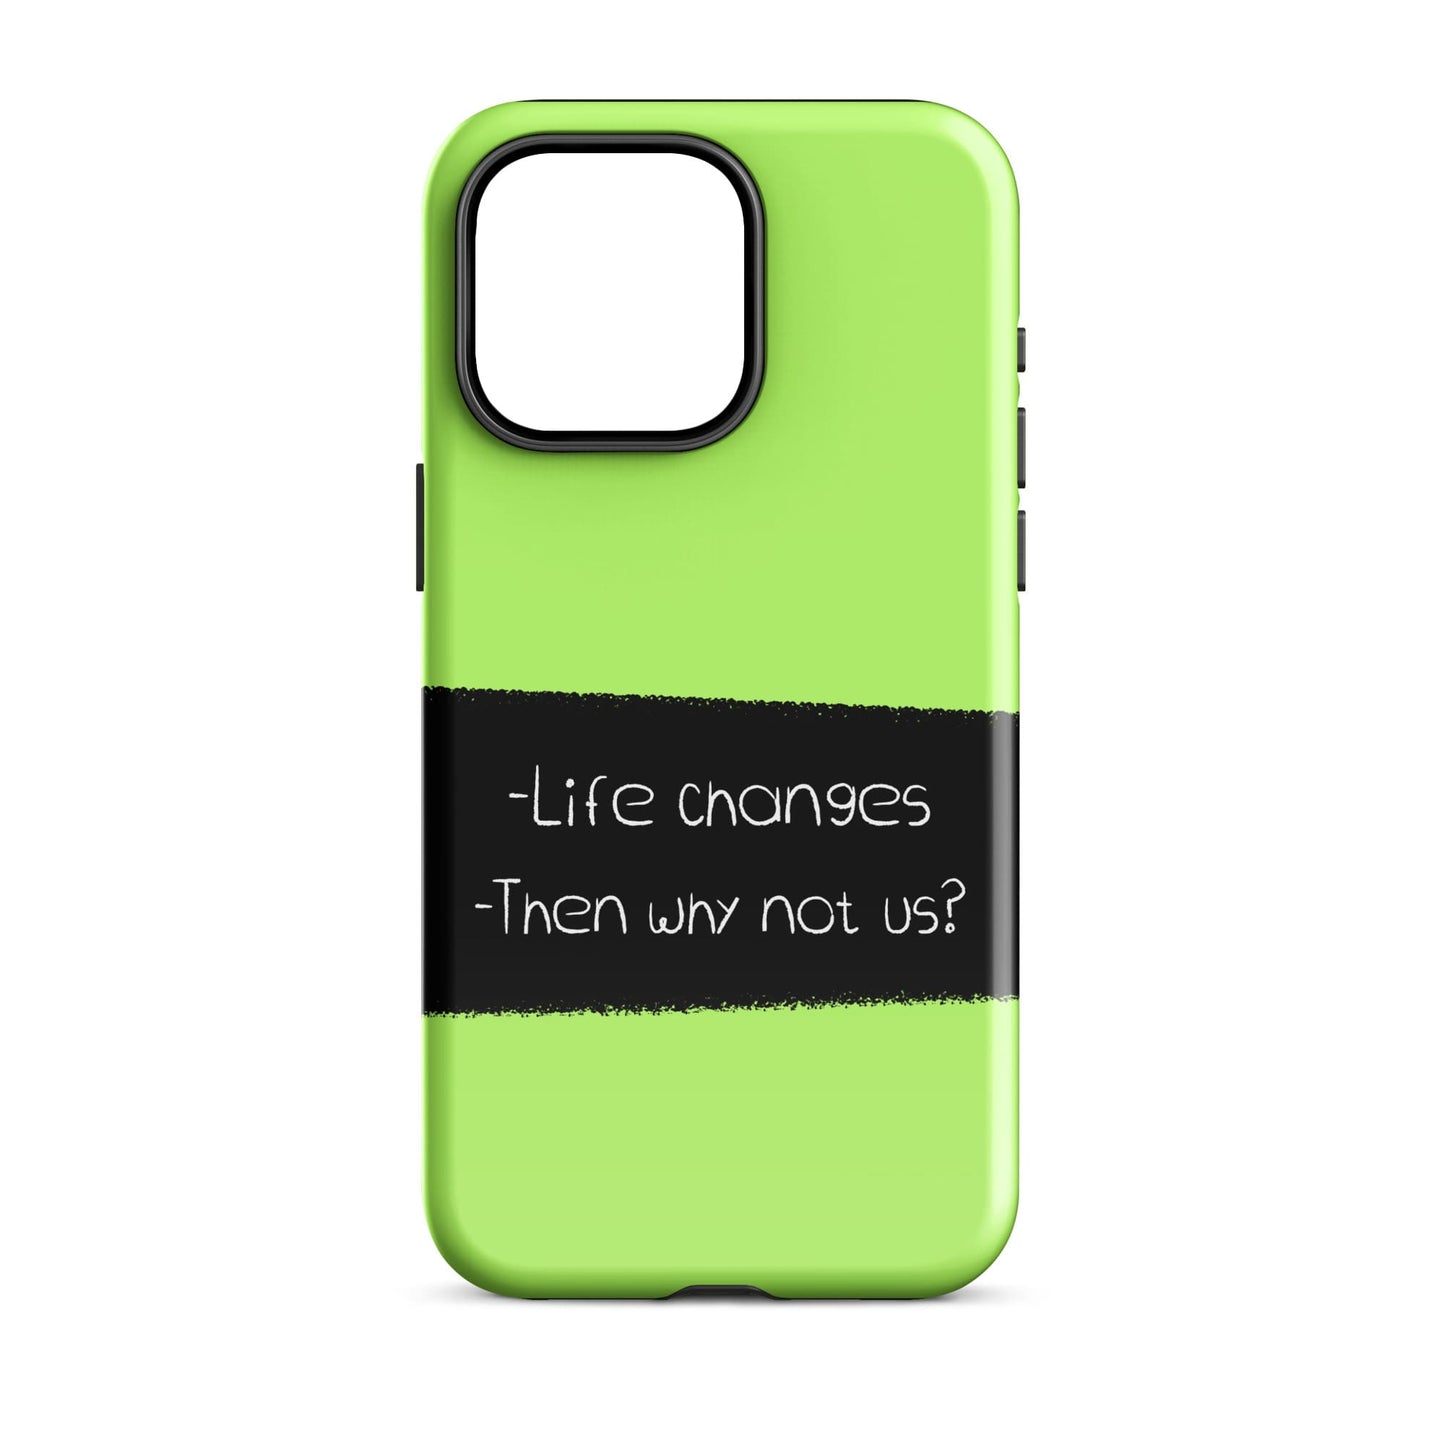 Life Changes - (Lime Green) Quoted iPhone Case